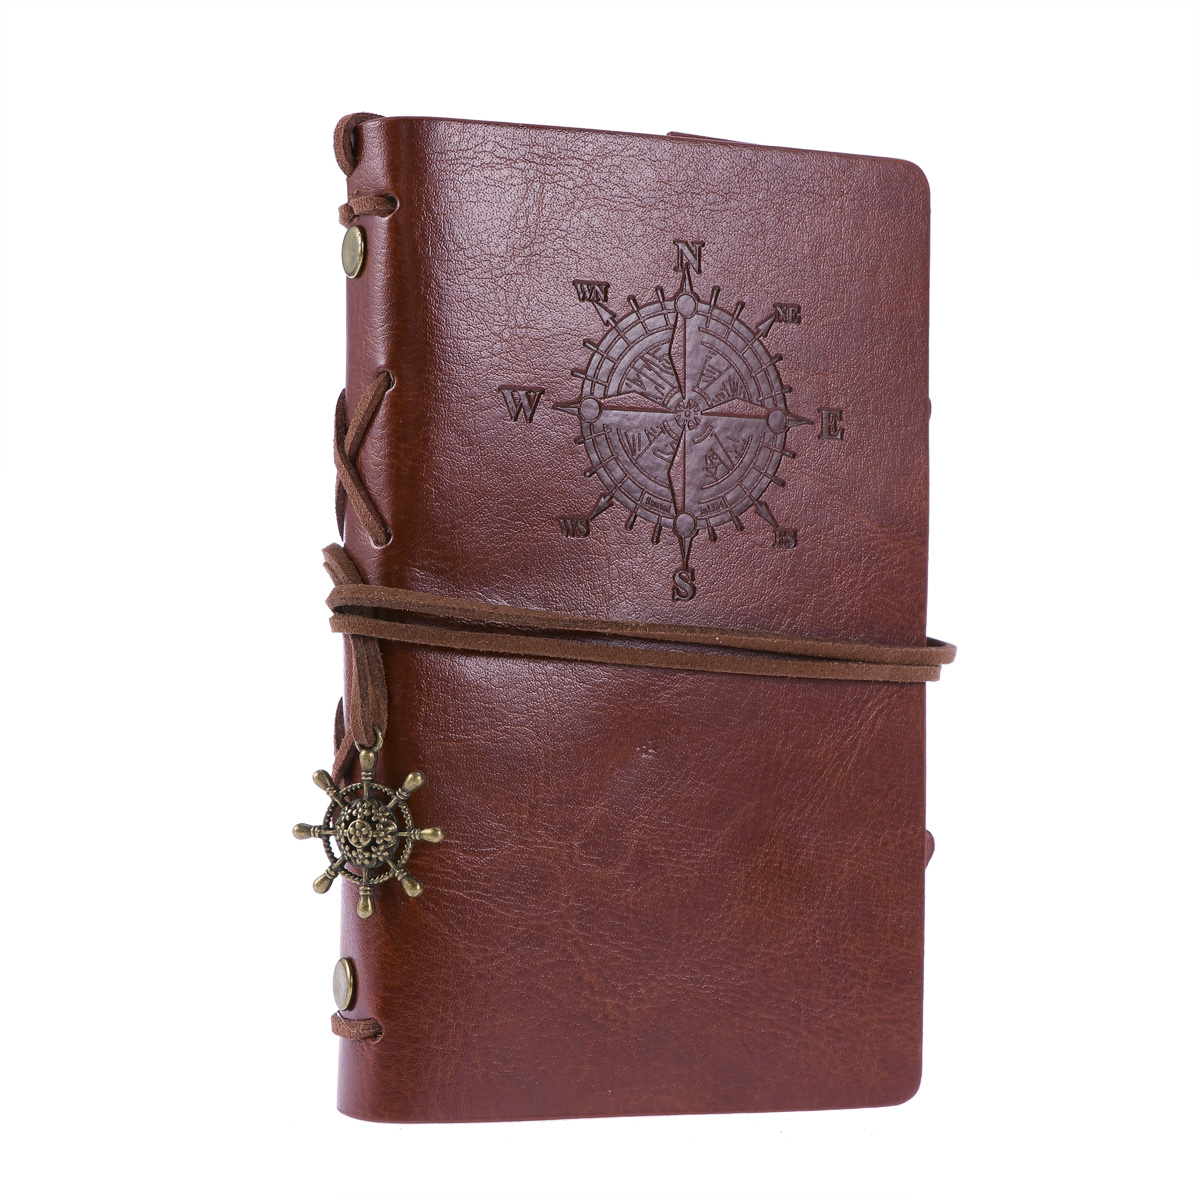 Retro Leather Cover Refillable Spiral Notebook Journal Diary Travel Notepad